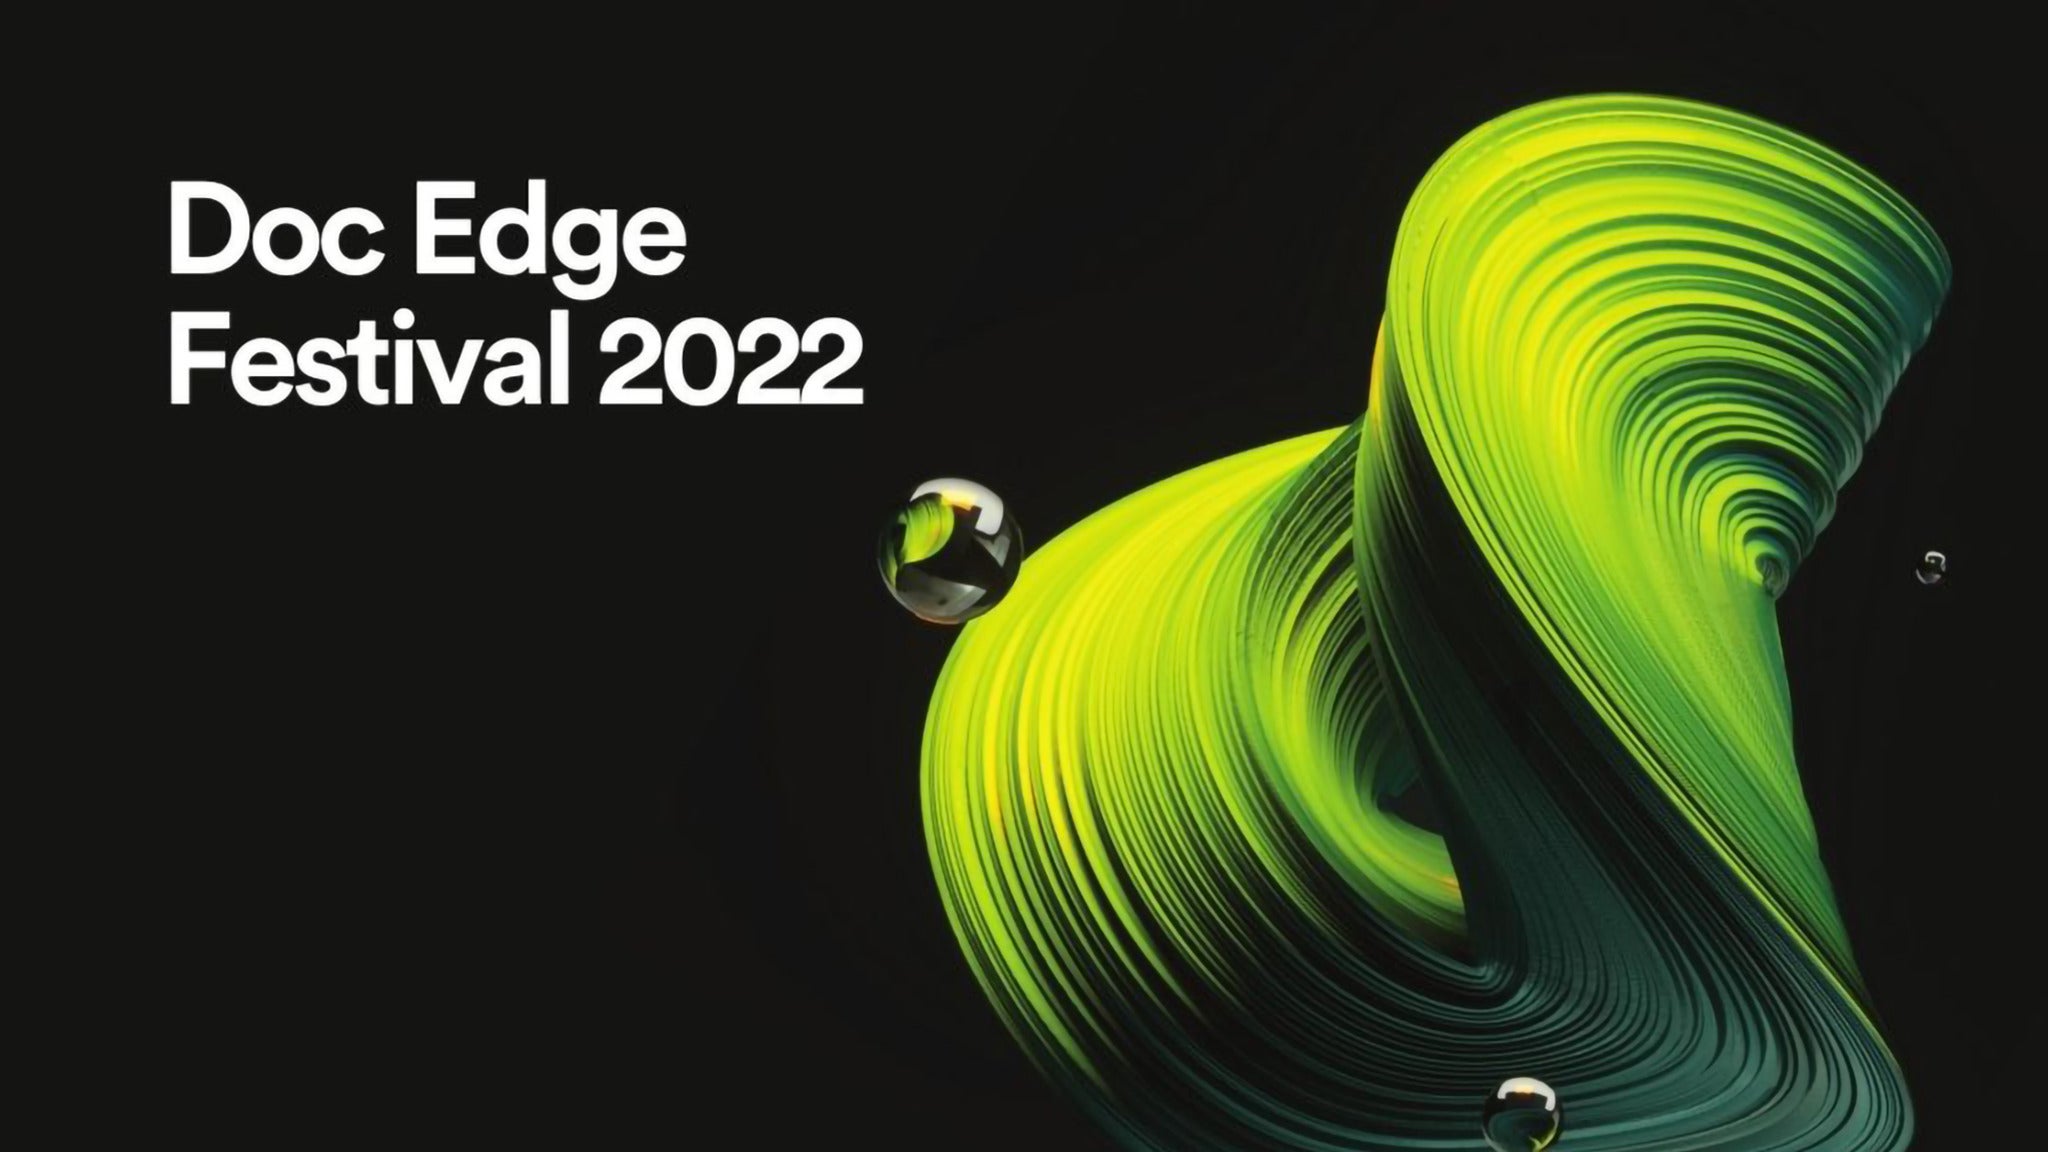 Image used with permission from Ticketmaster | Doc Edge Film Festival 2022: Only I Can Hear tickets